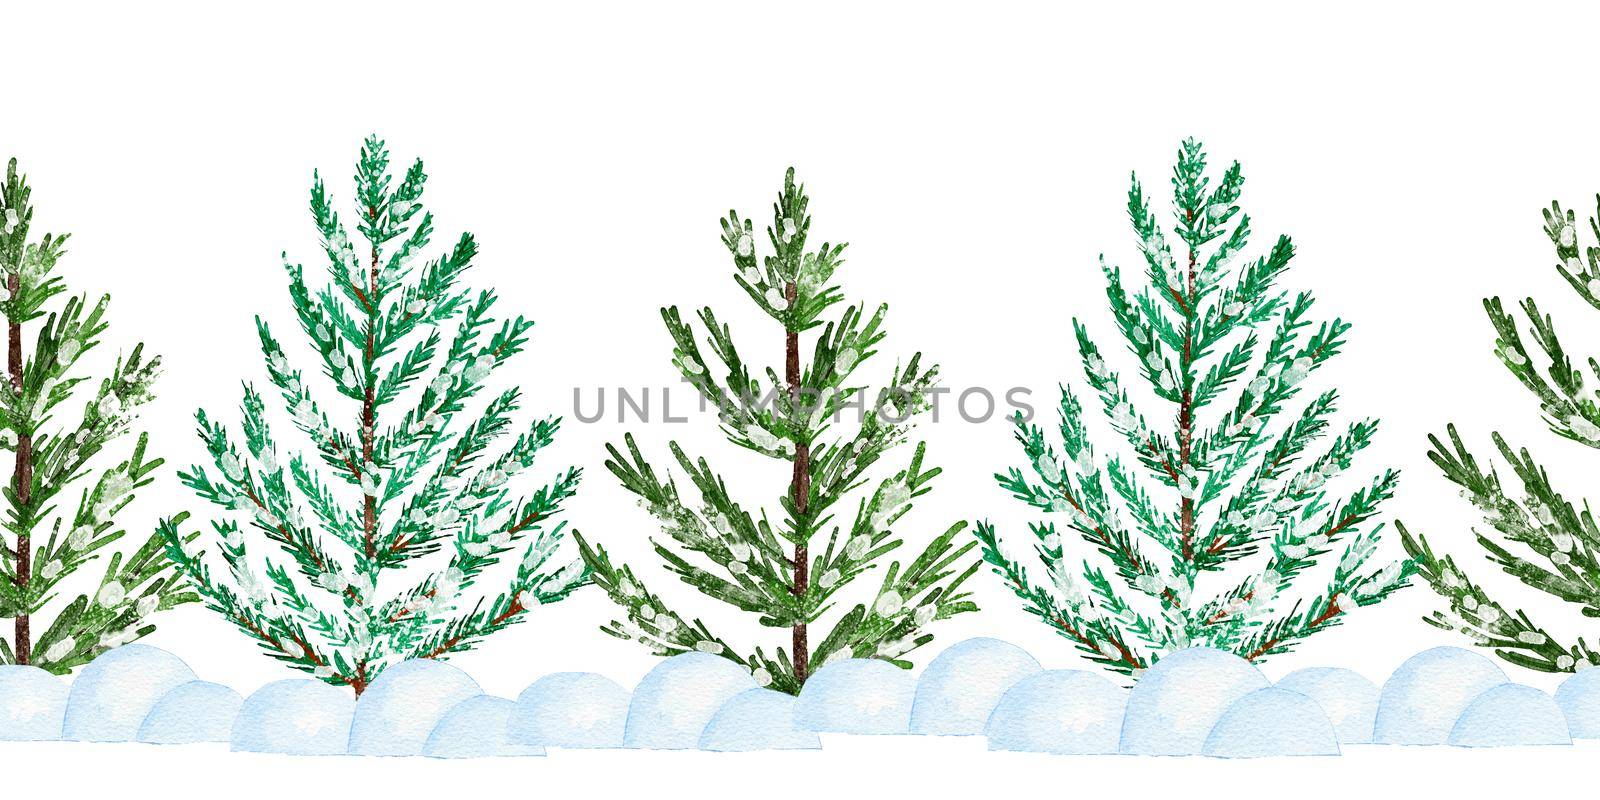 Watercolor seamless hand drawn border with Christmas trees. Winter december forest wood woodland decor, pine fir conifer branches in snow ornaments, horizontal clipart frame